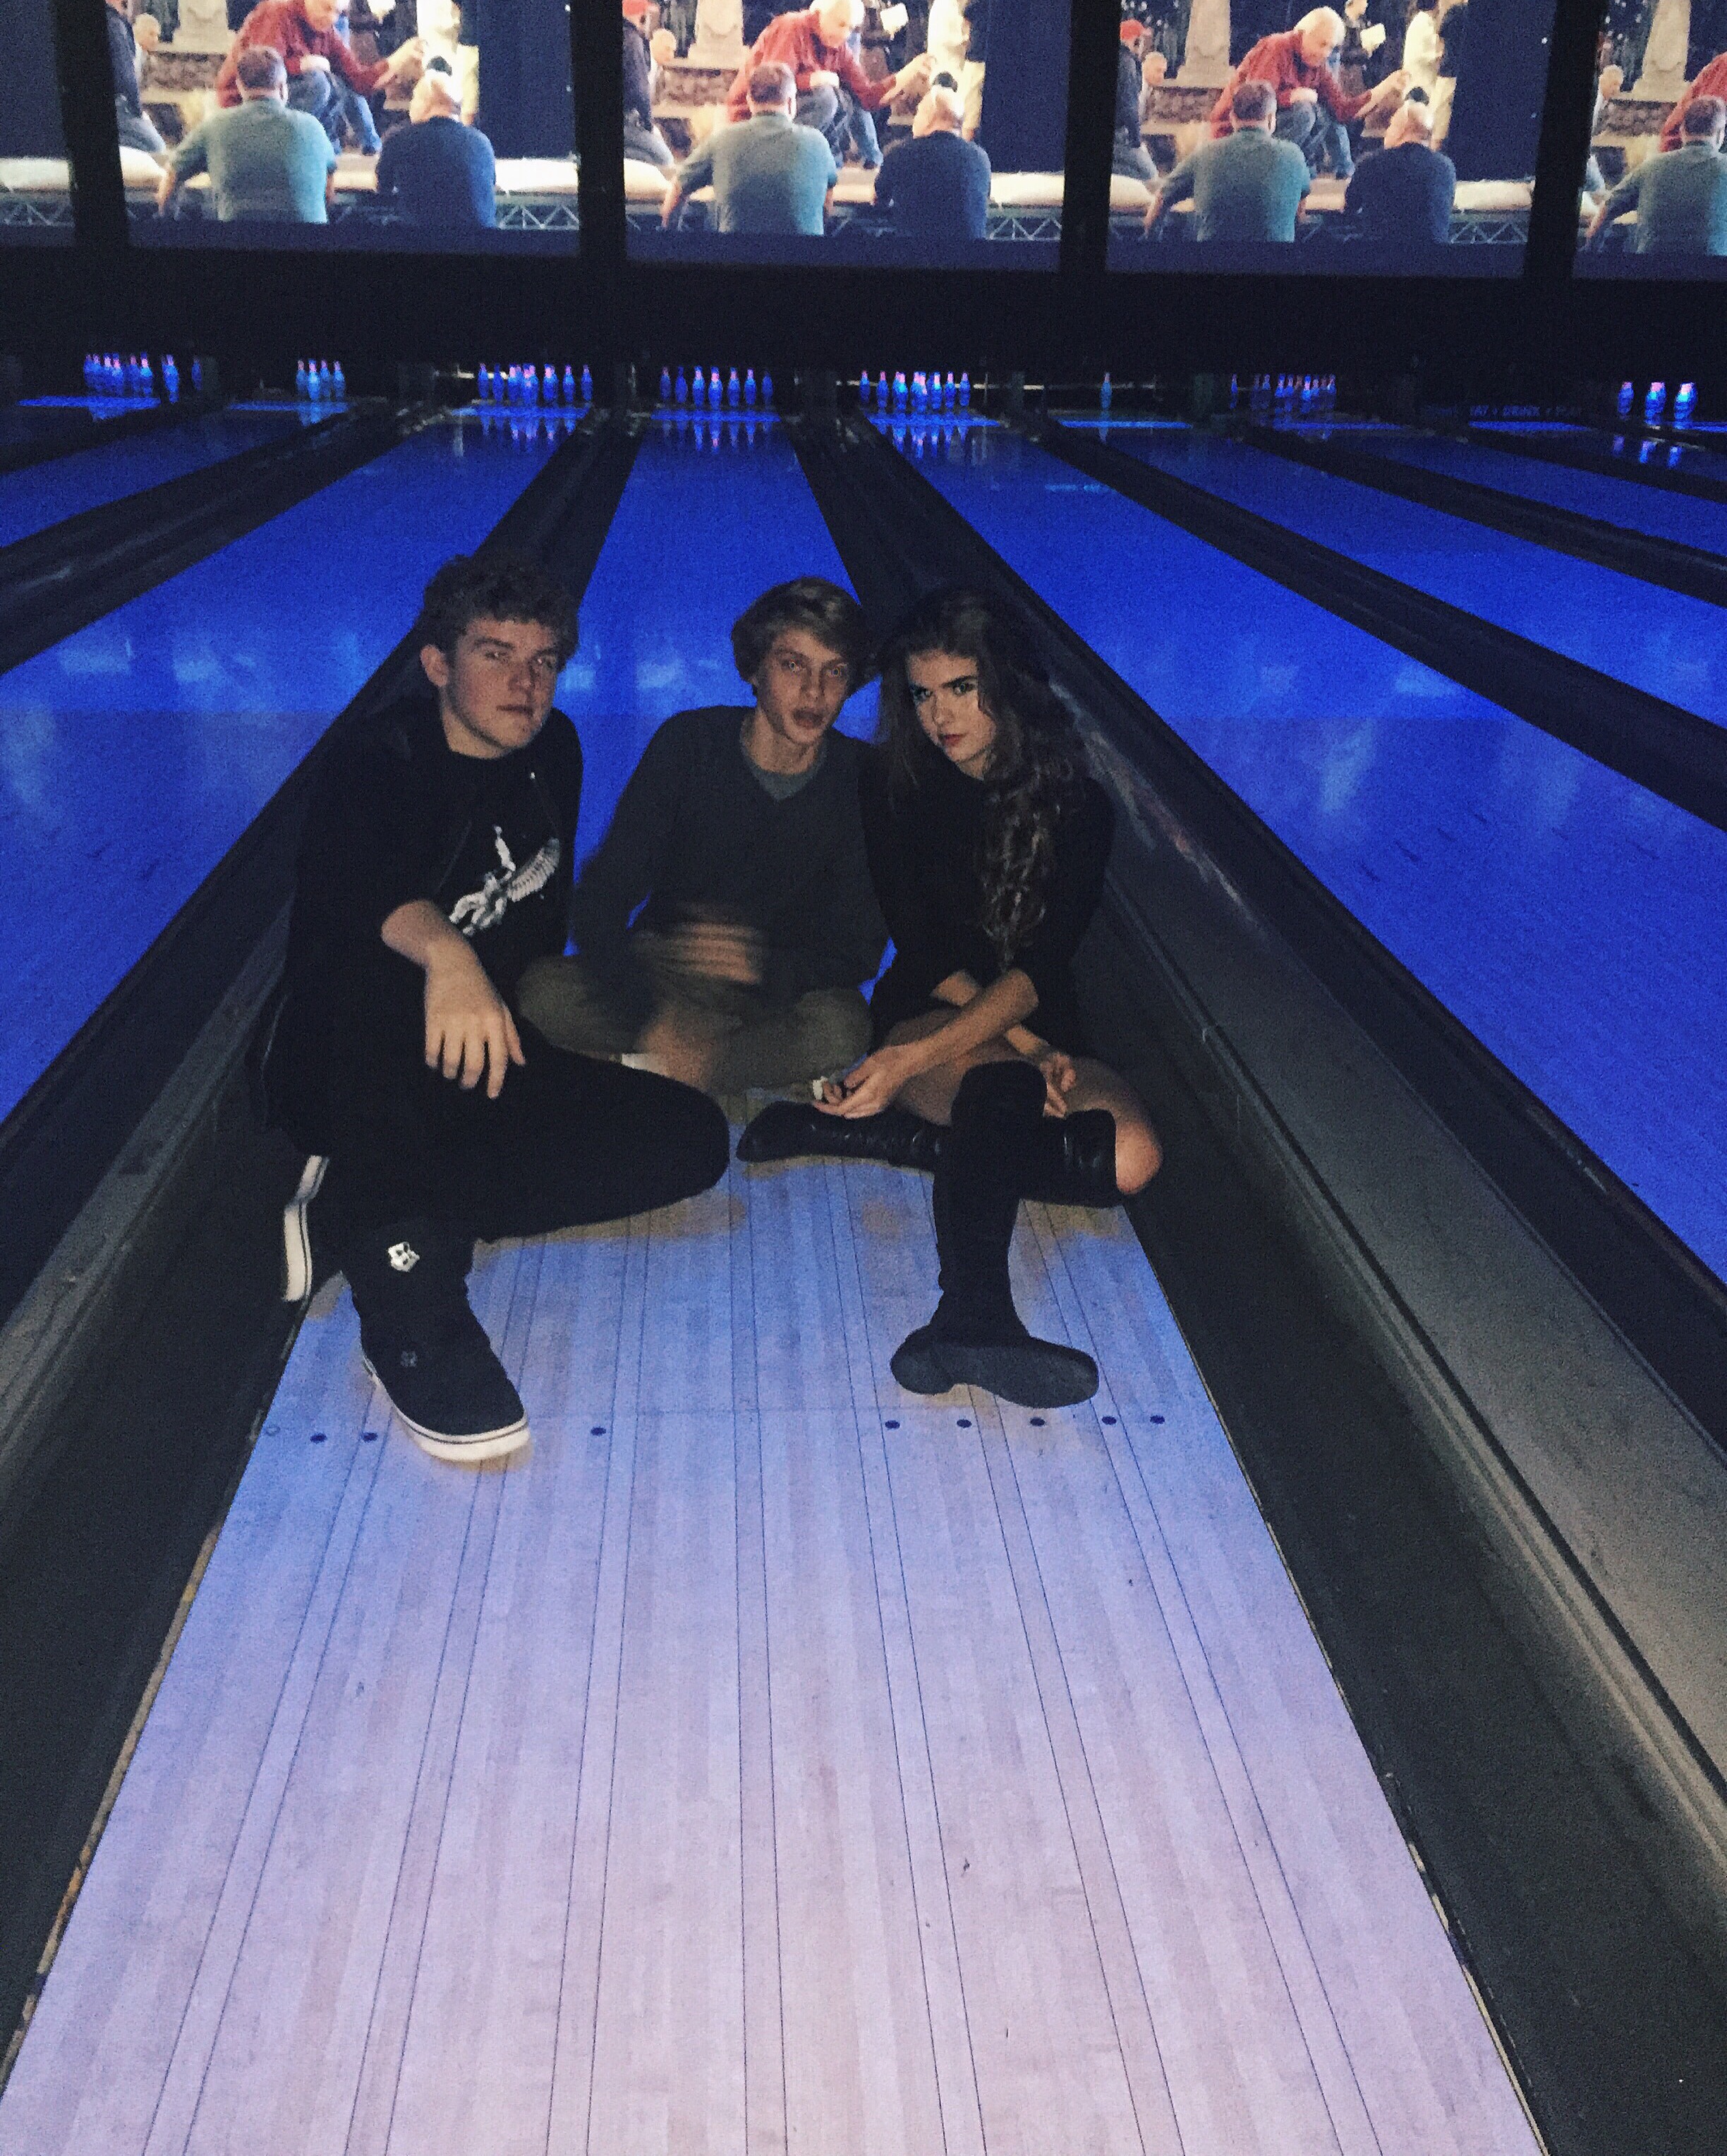 In order from left to right: Sean Ryan Fox, Jace Norman, Maeve Tomalty.